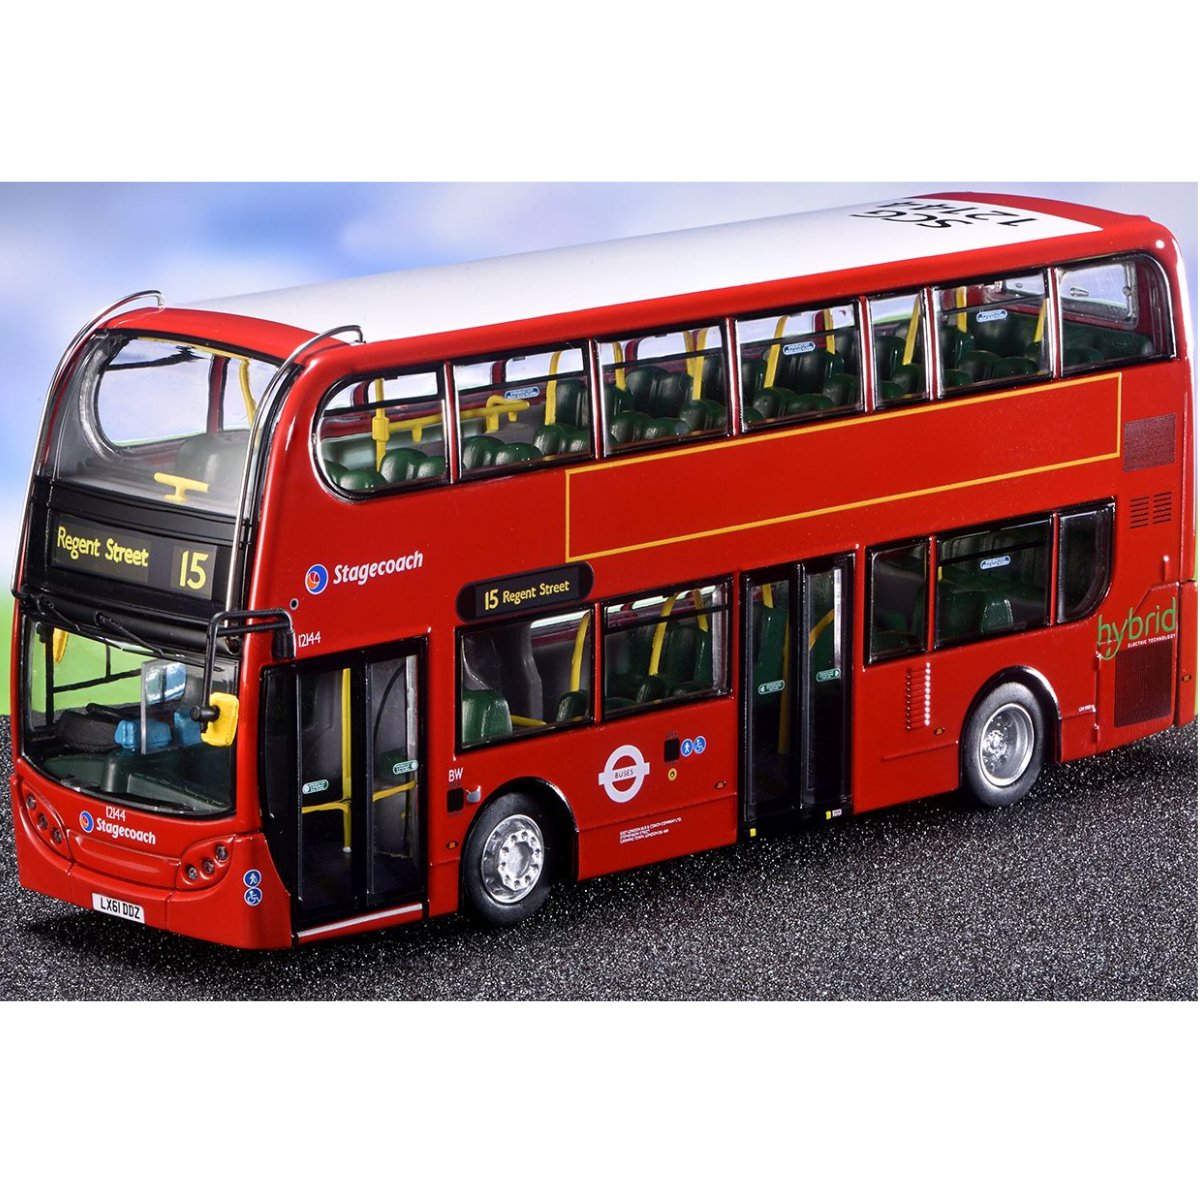 1:76 Scale Northcord UK6203 ADL Enviro400 Stagecoach London